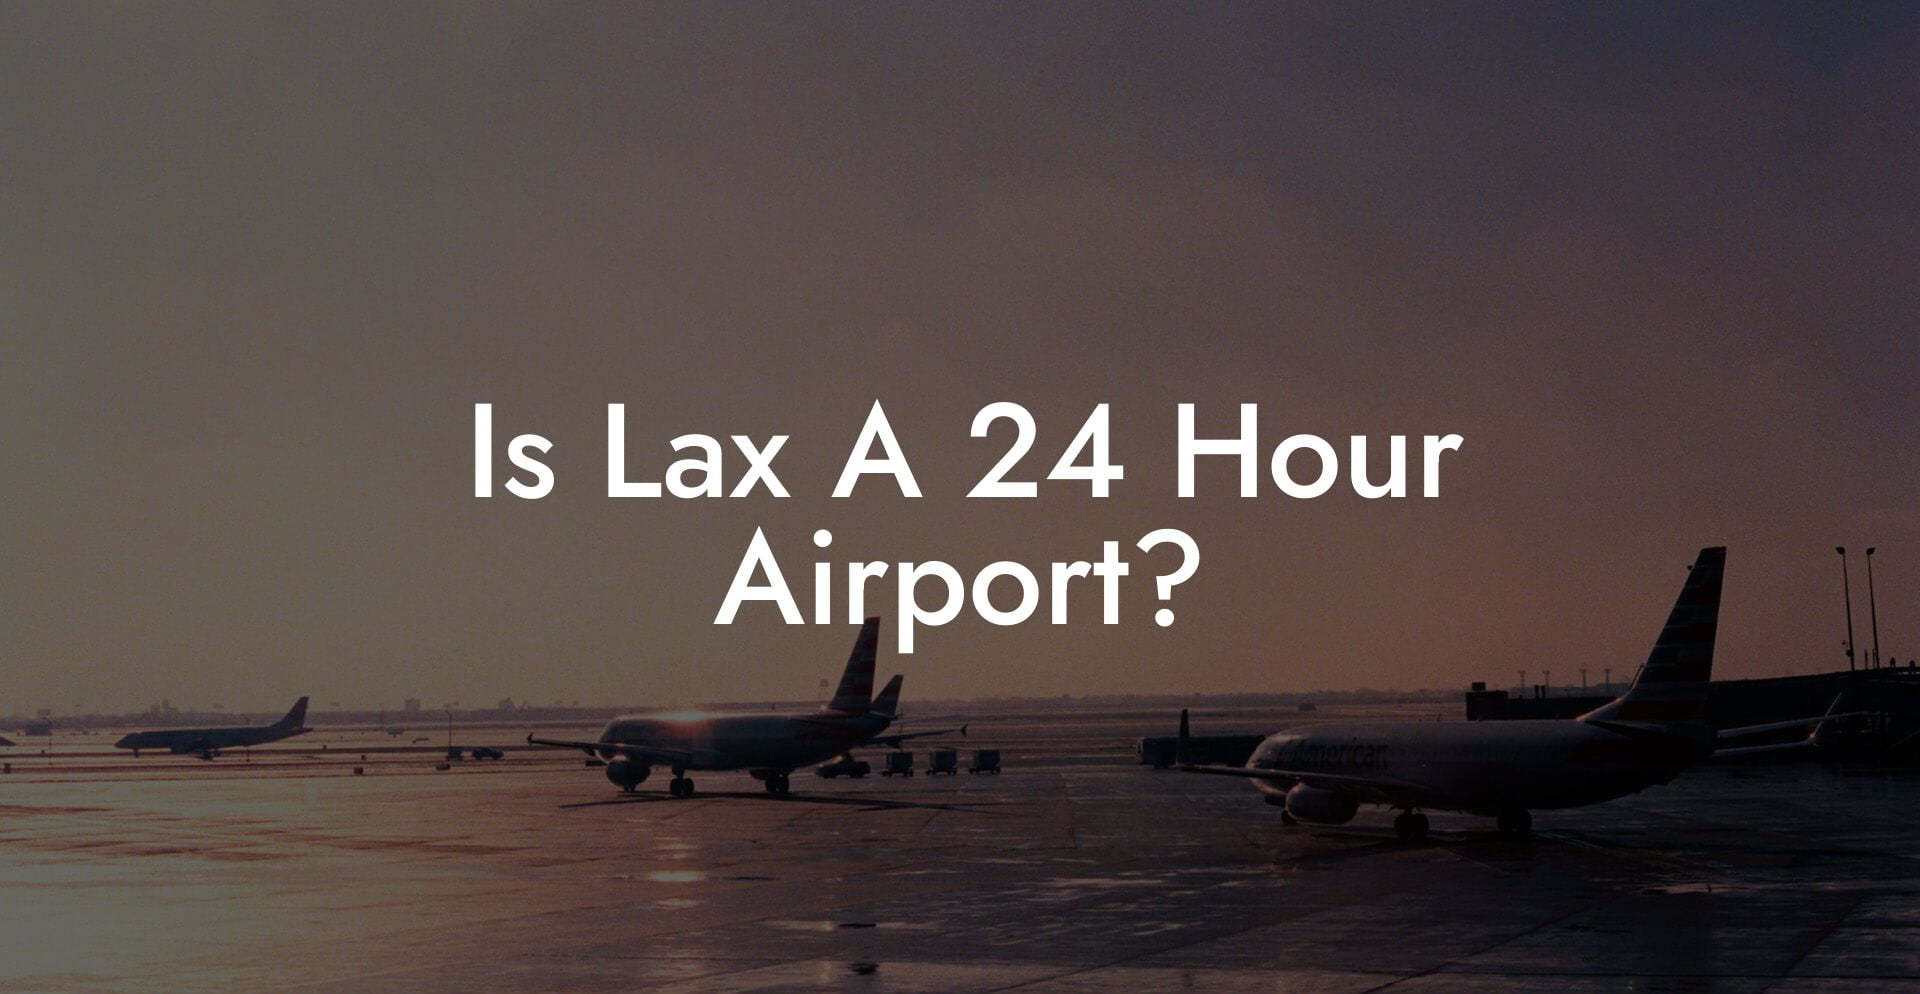 Is Lax A 24 Hour Airport?